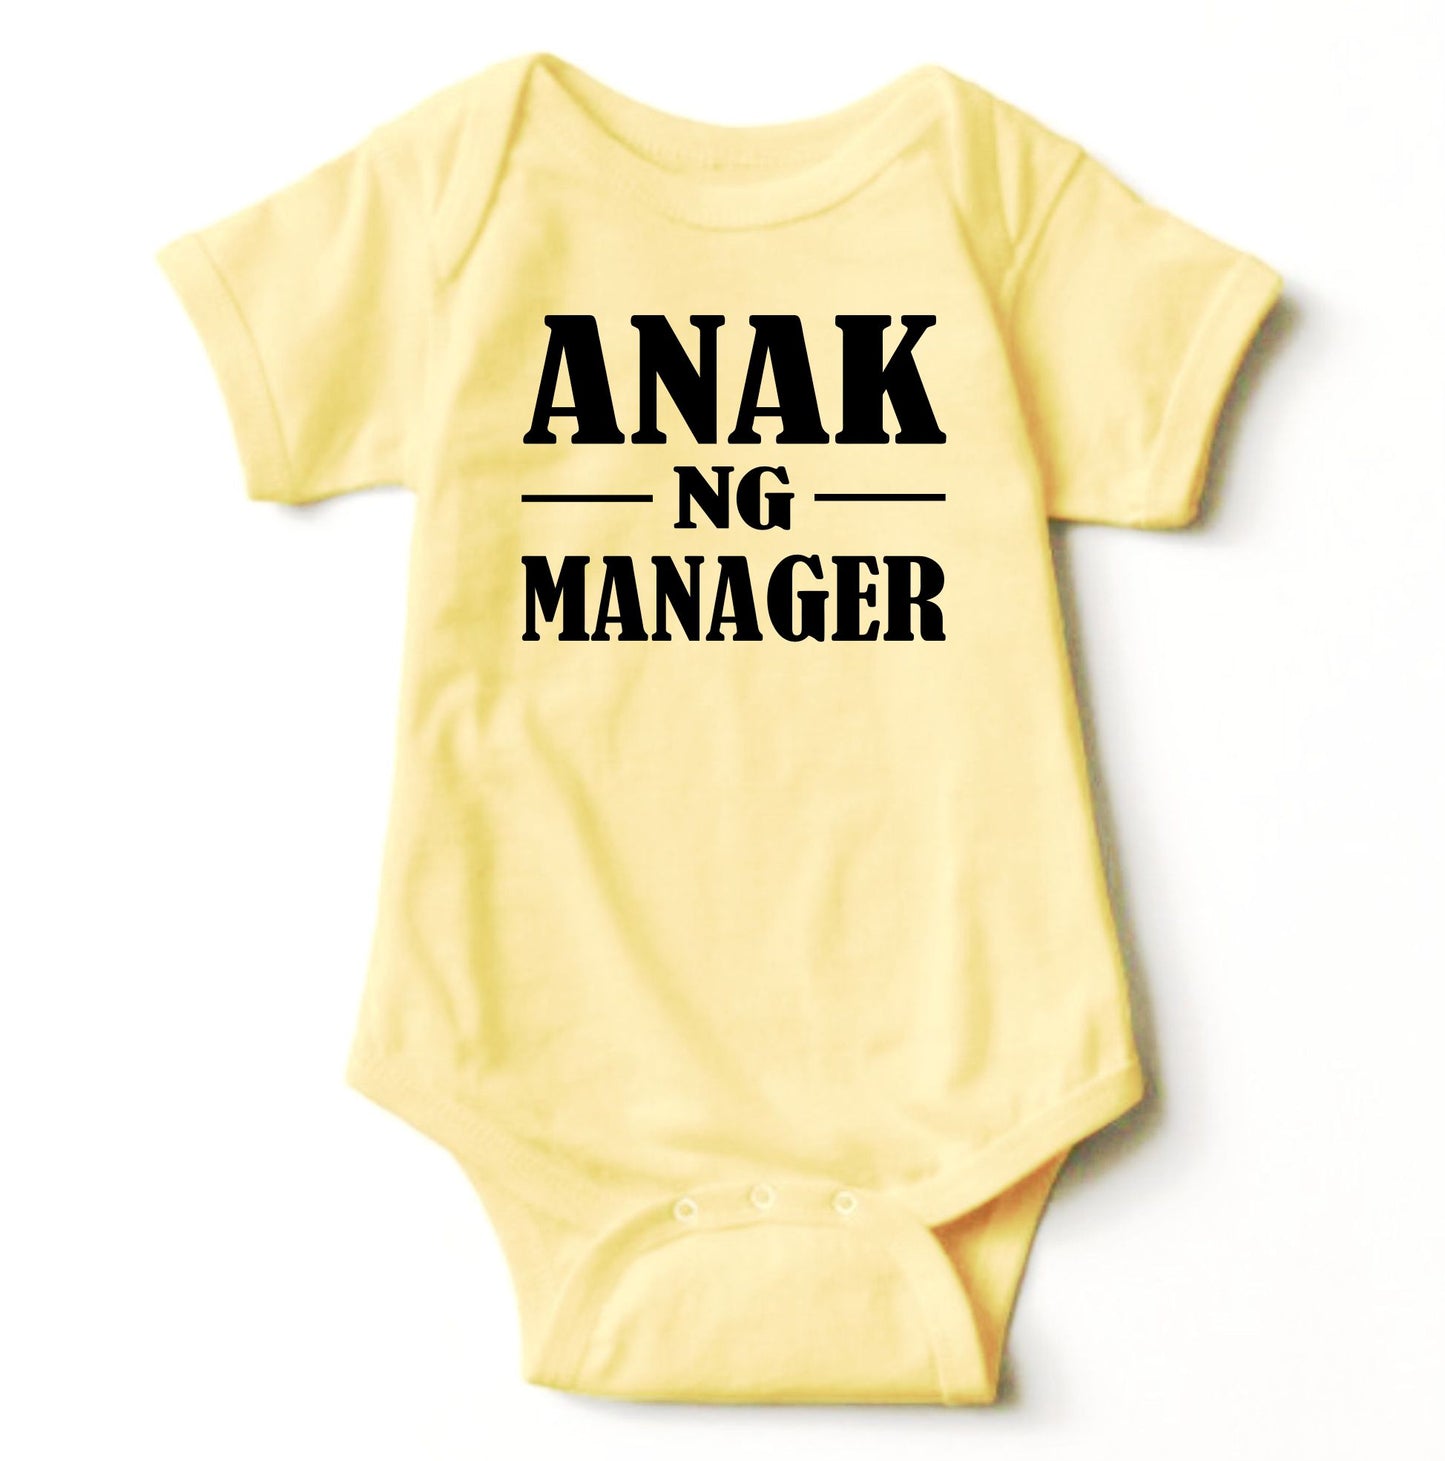 Baby Statement Onesies - Anak ng Manager